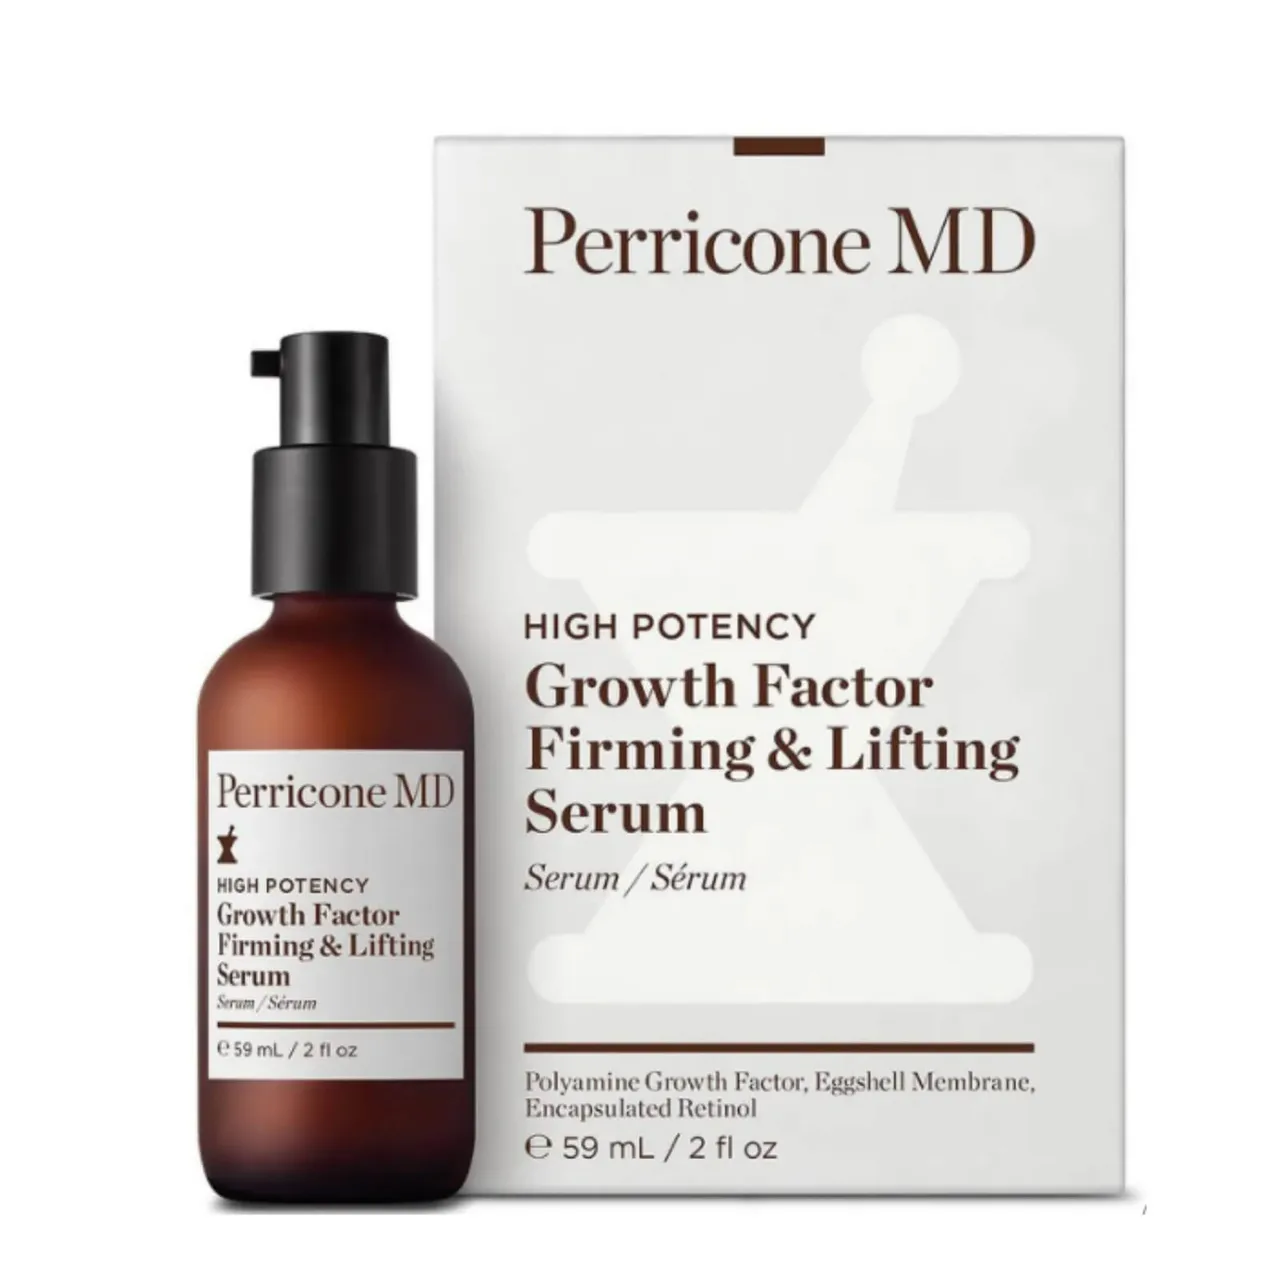 Perricone MD High Potency Growth Factor Firming and Lifting Serum 59ml